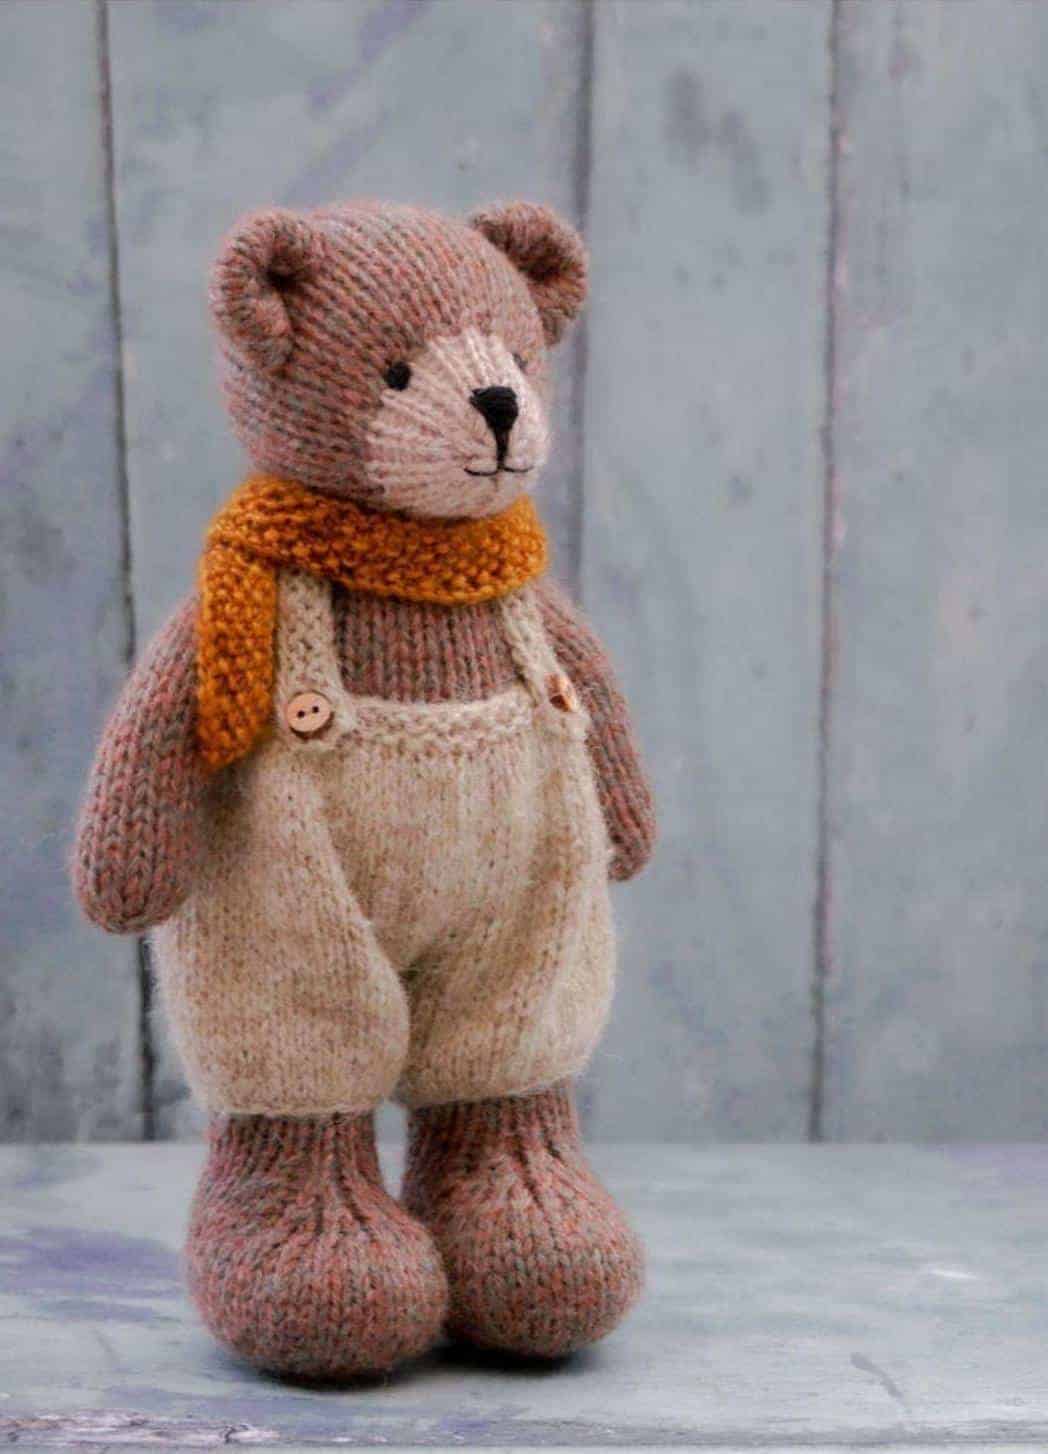 Simple knit bear 's sweater / bear outfit 